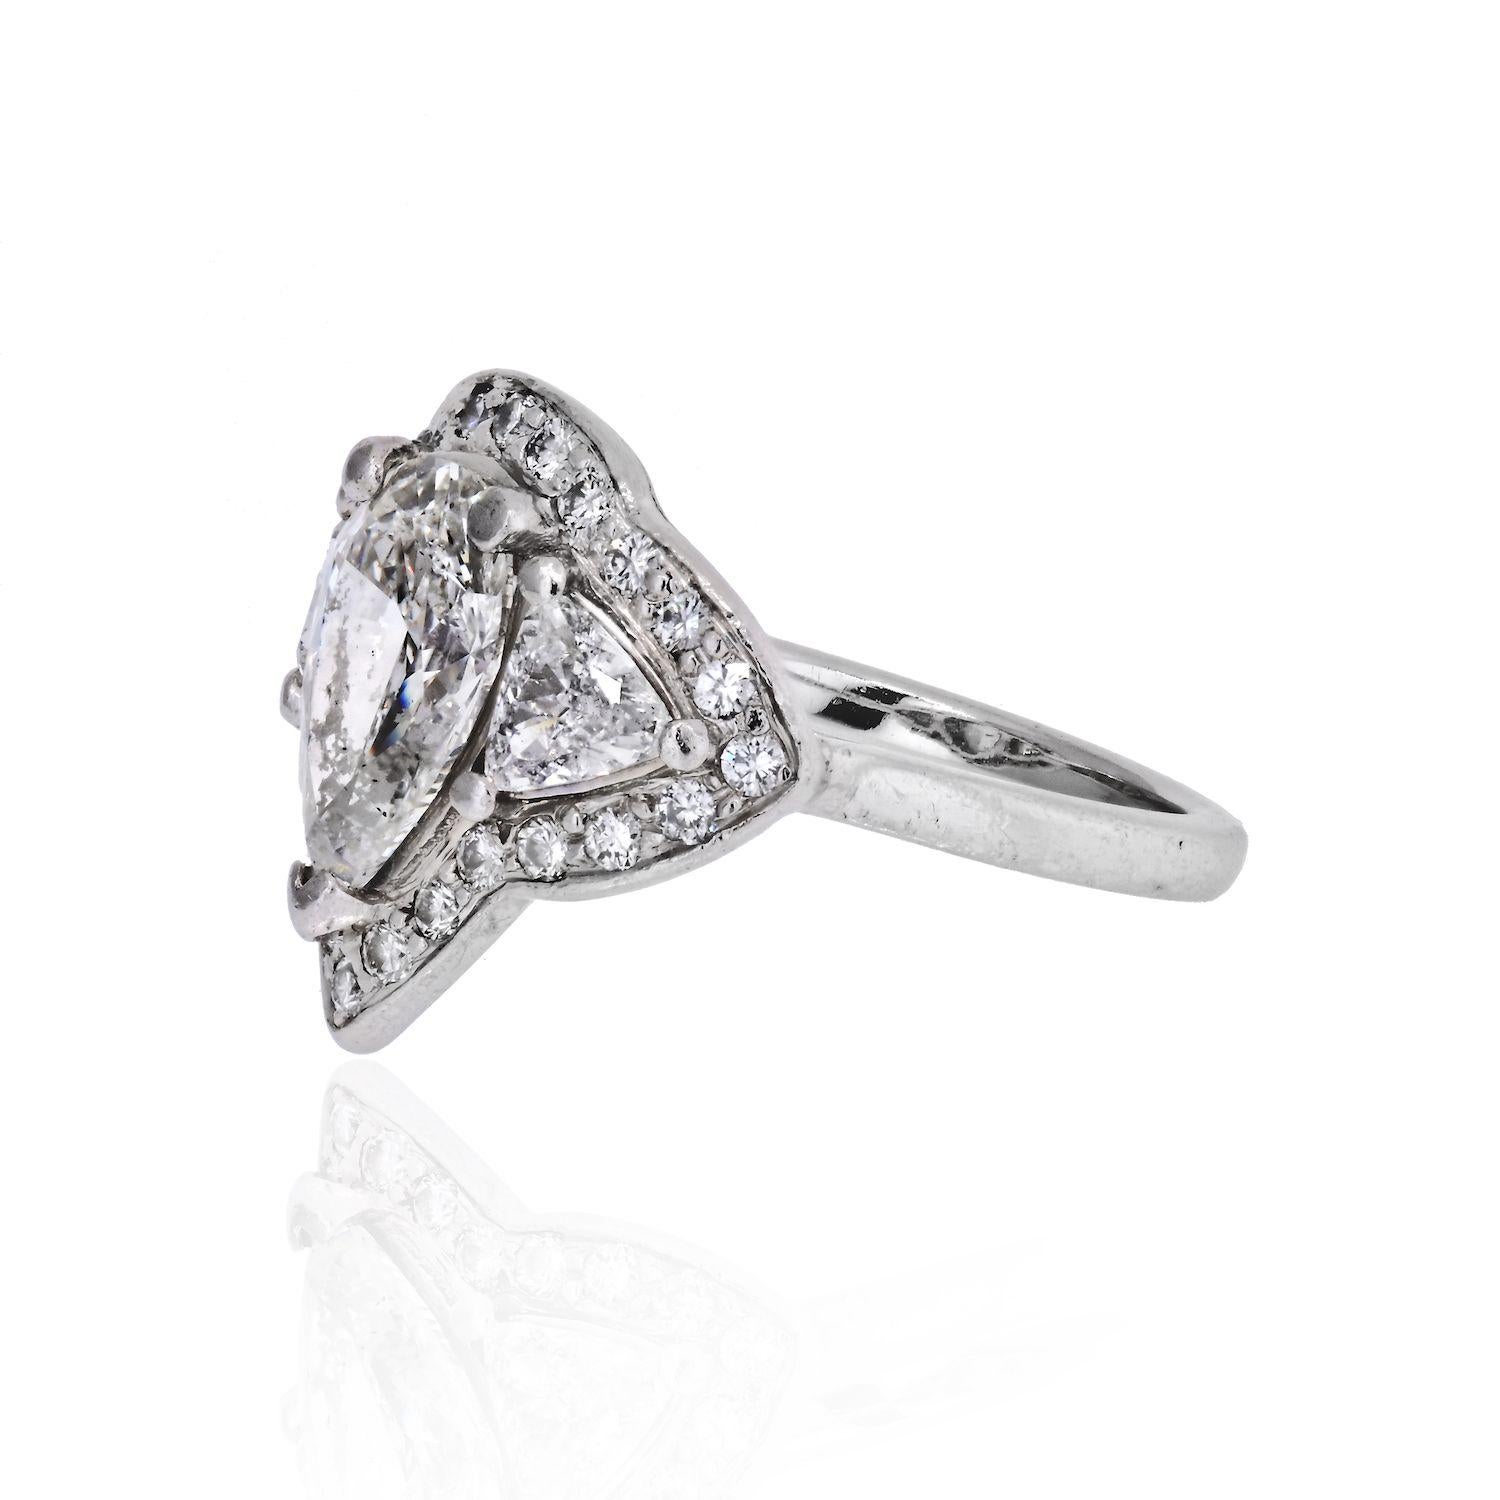 Always be on her mind when you propose with this Pear Shape Three Stone Diamond Engagement Ring. This features a Pear Cut center stone on a Halo 3 Stone Trilliants and a row micro pave halo. This unique designed ring will really look amazing on your